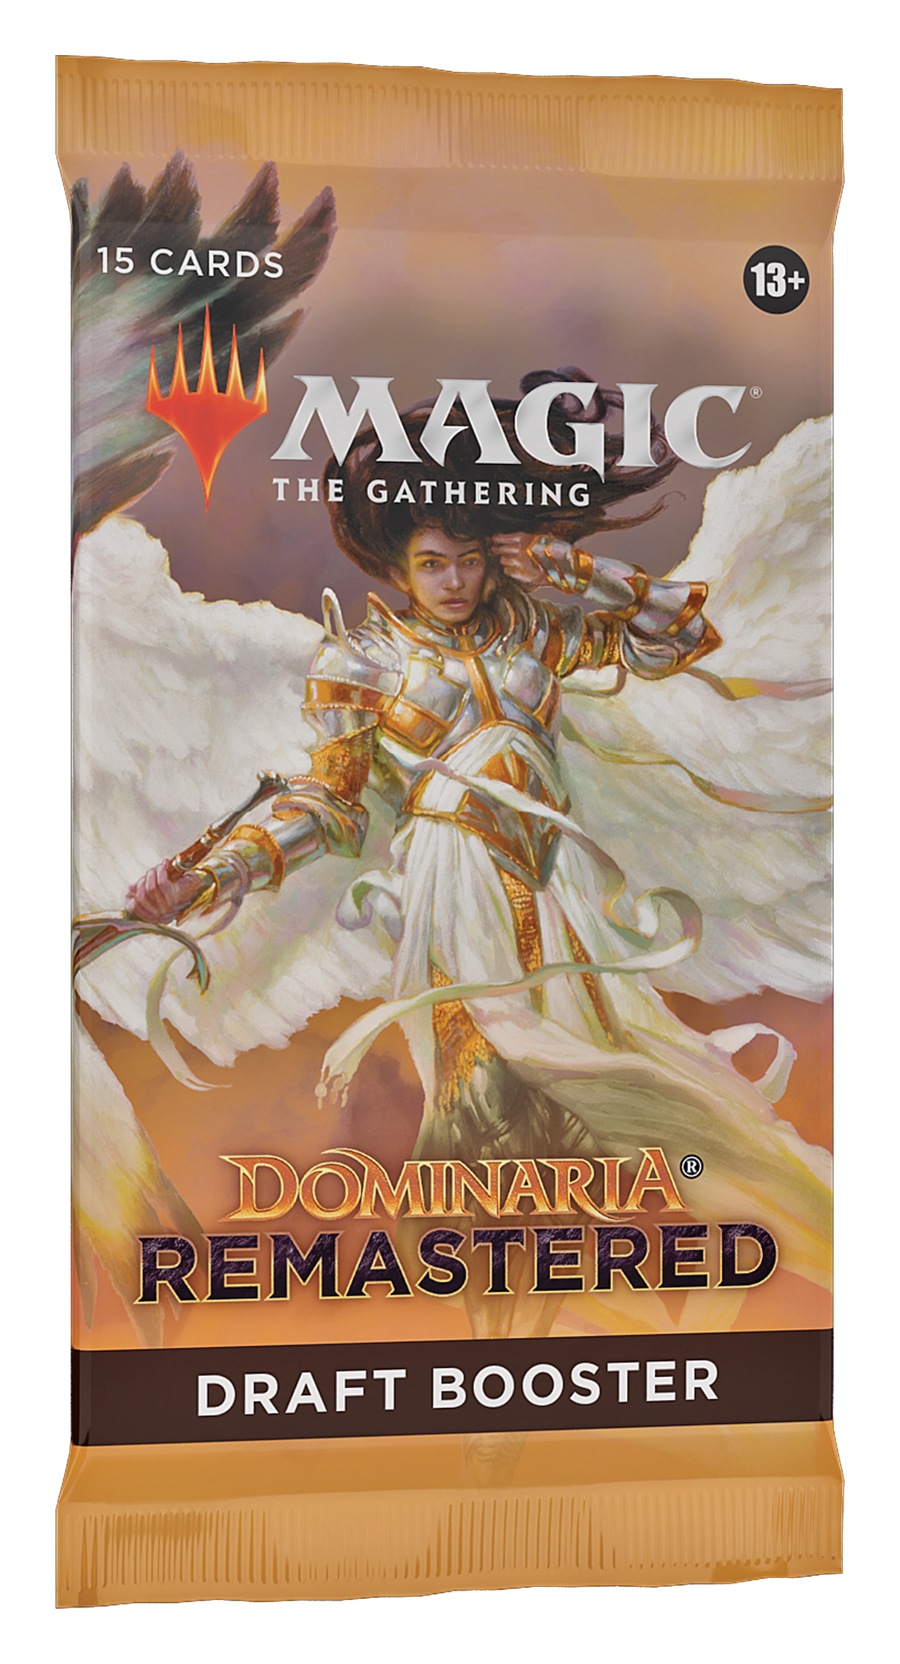 Magic: the Gathering - Dominaria Remastered Draft Booster